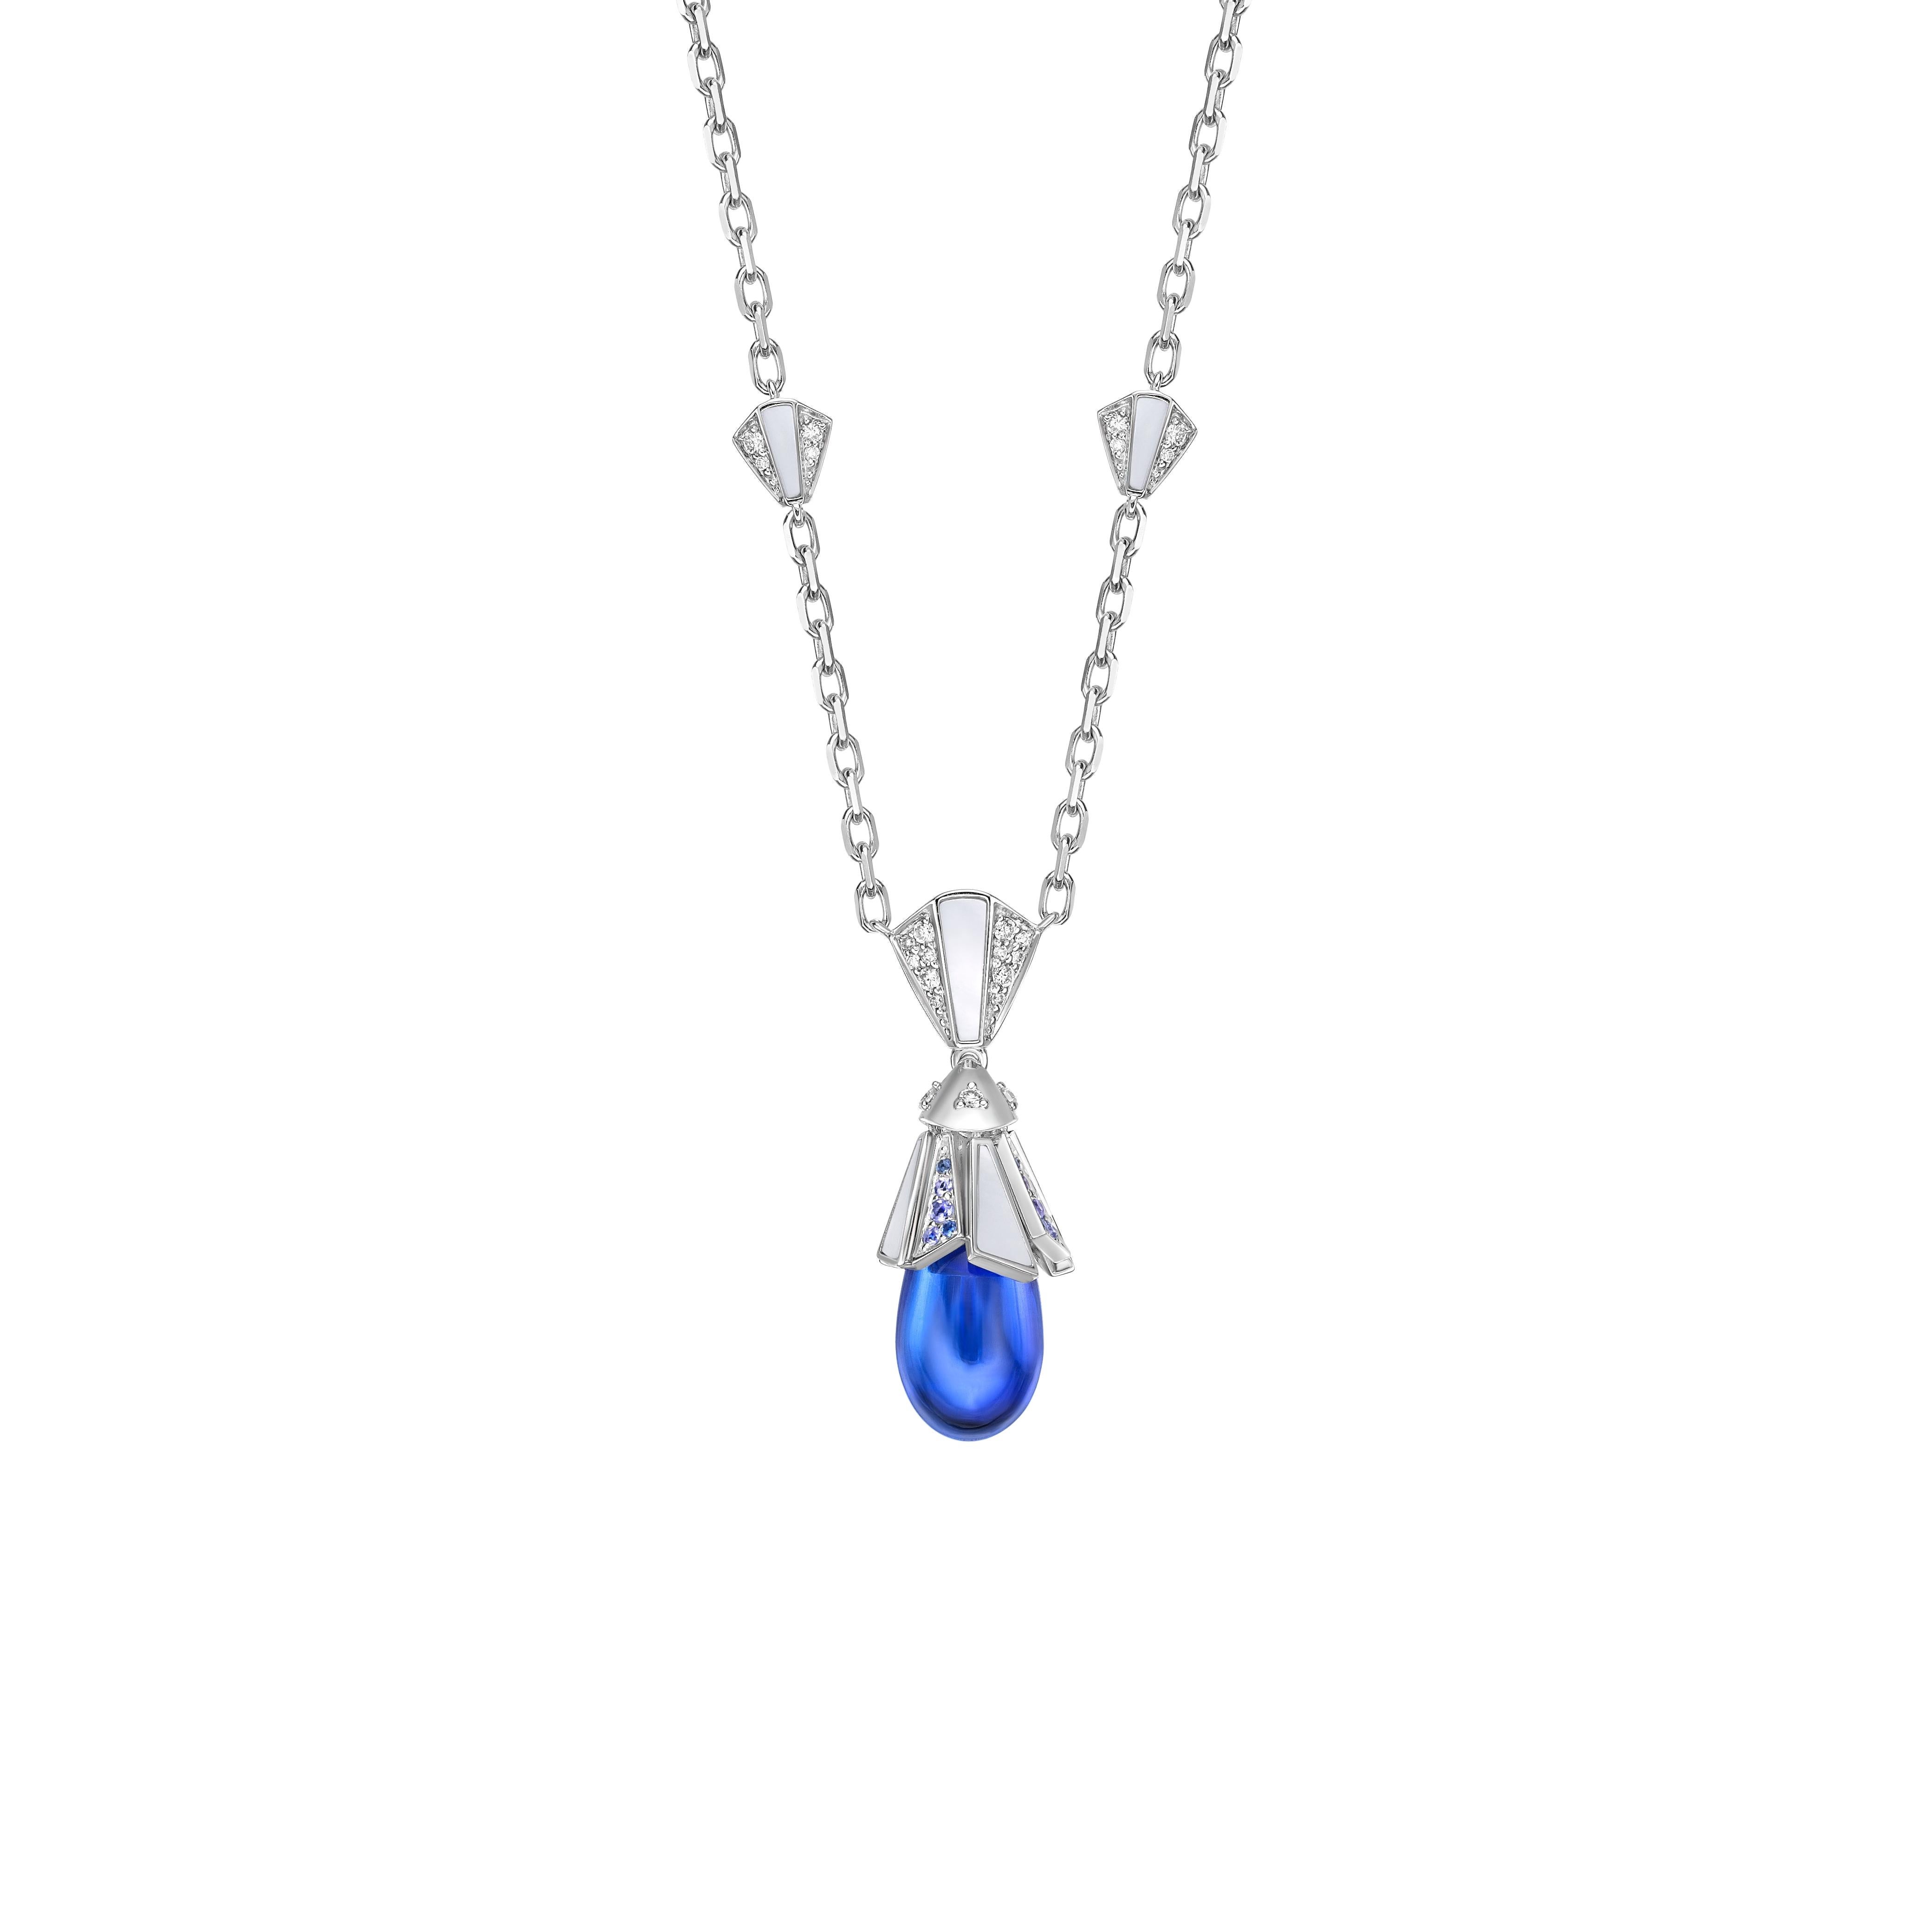 Mixed Cut 11.08 Carat Tanzanite Necklace in 18Karat White Gold with Multi stone. For Sale